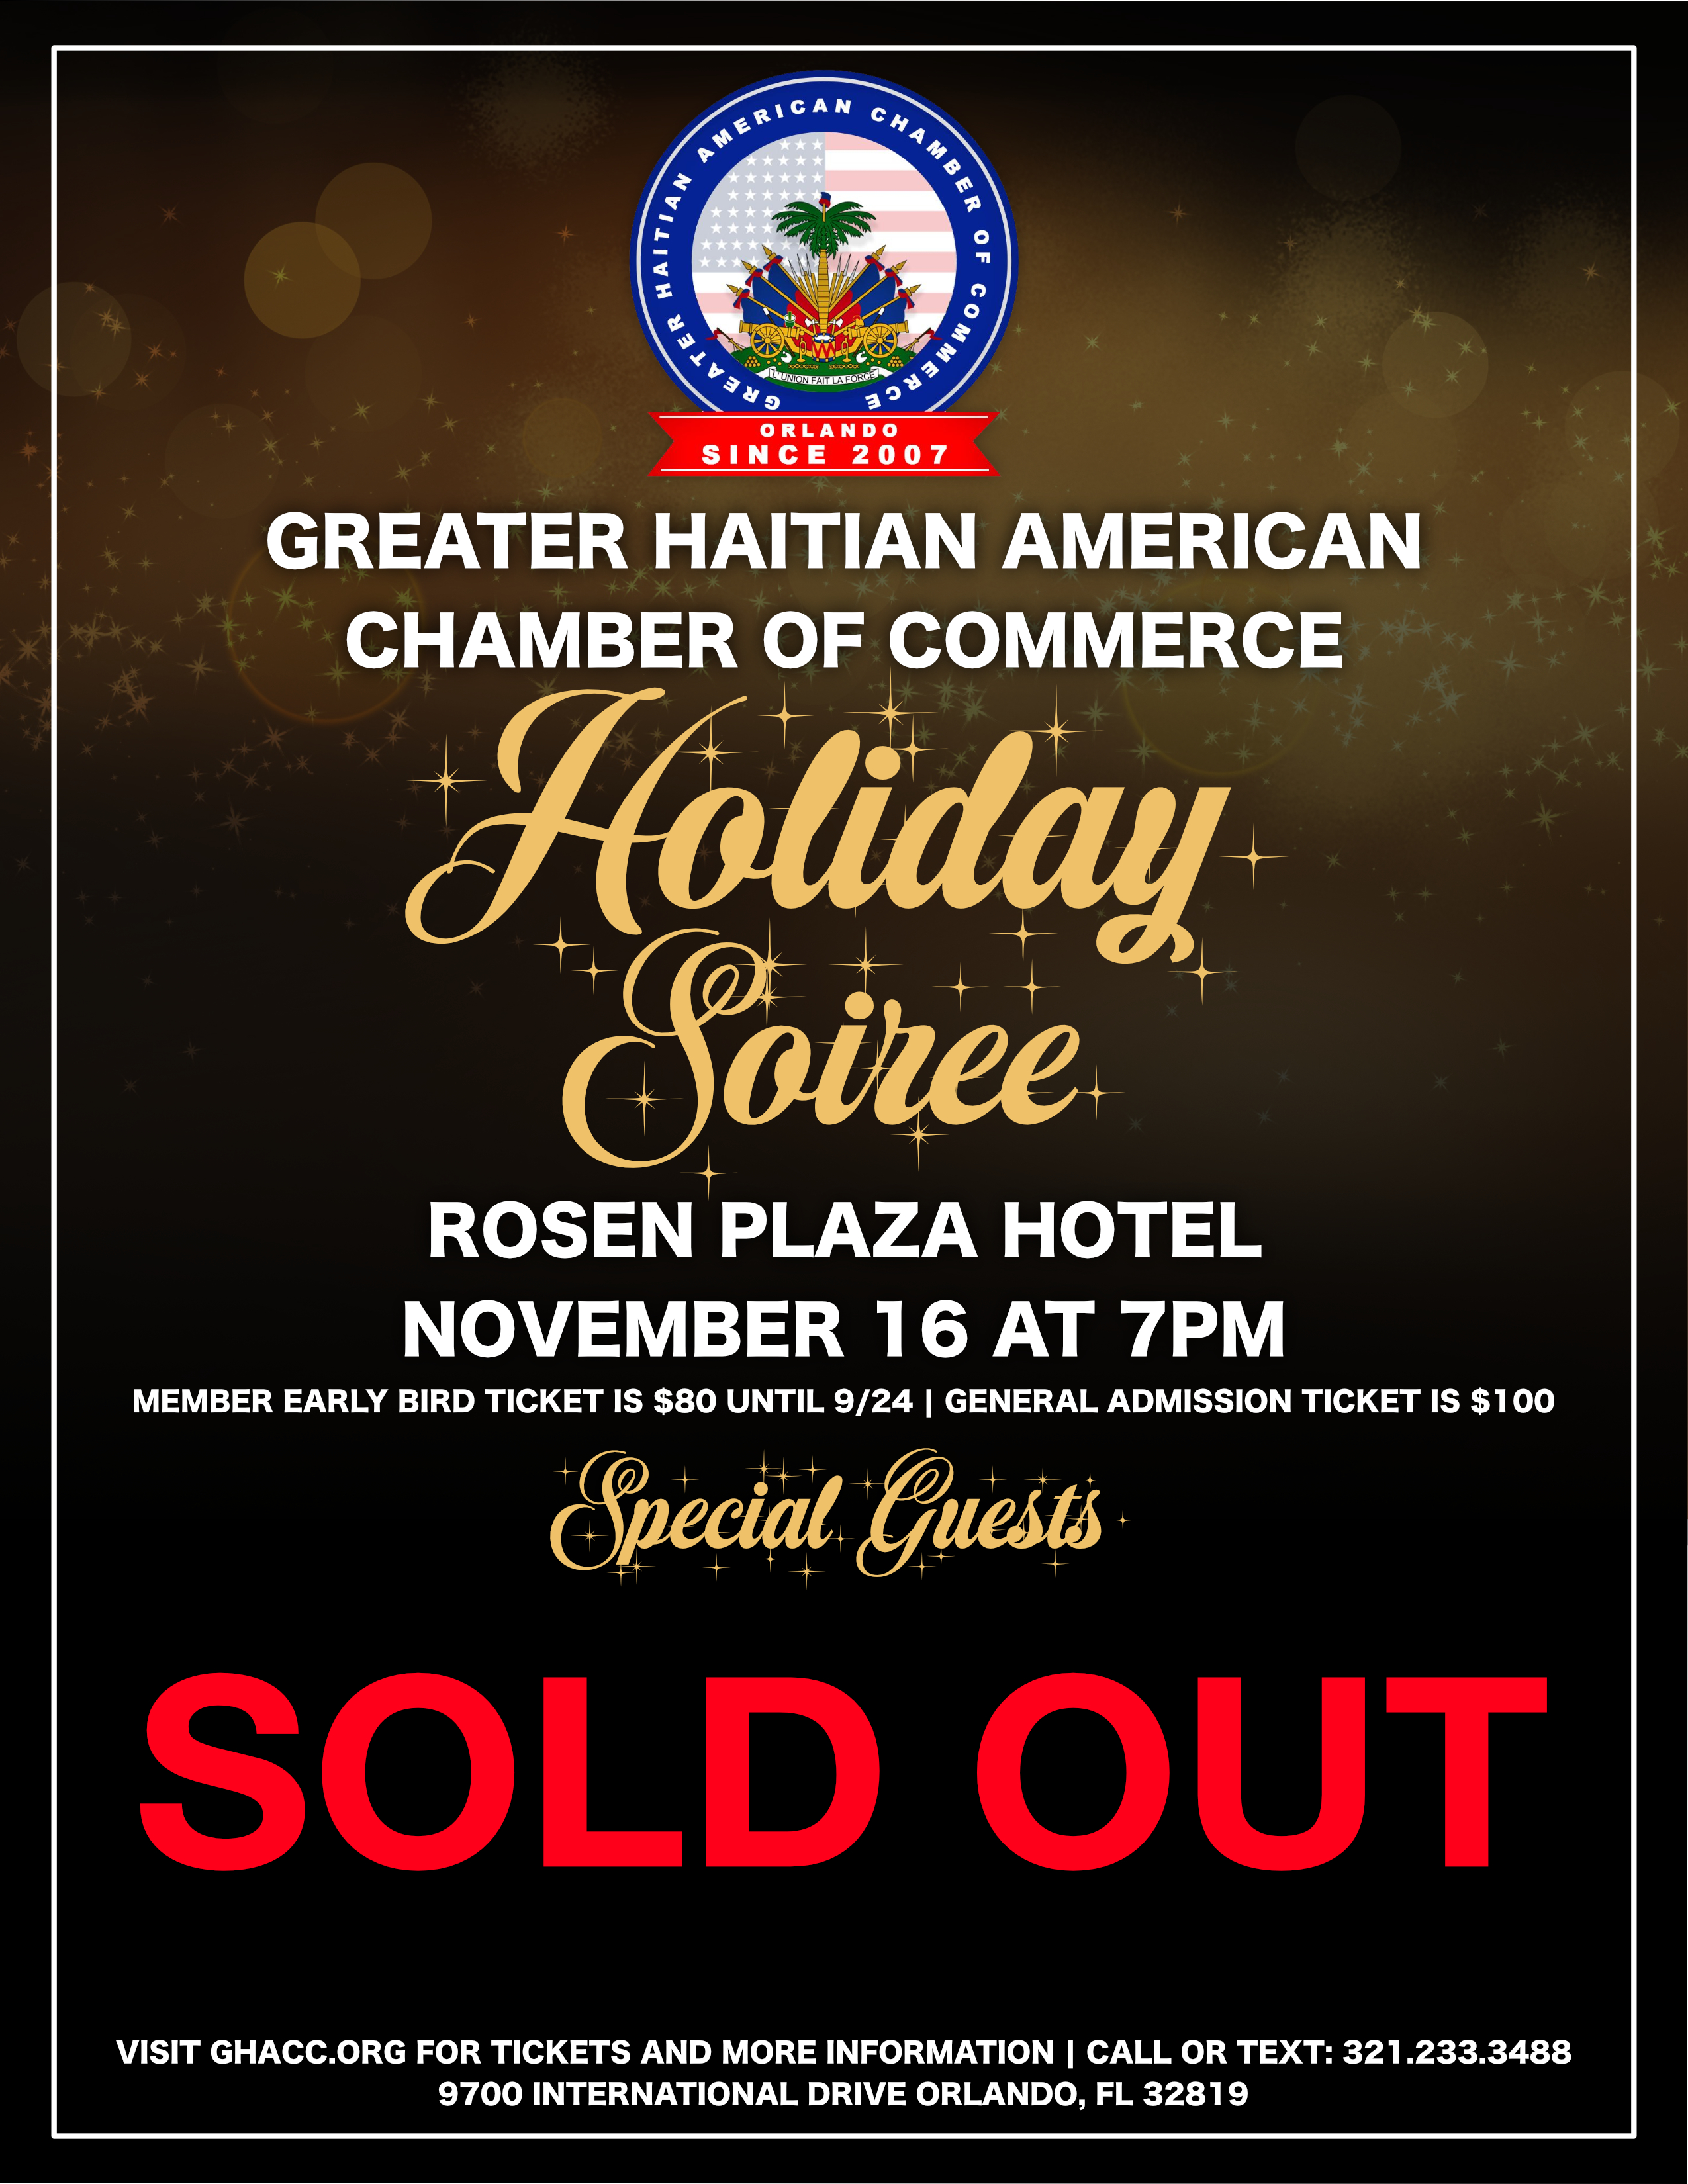 Soiree Flyer Sold Out